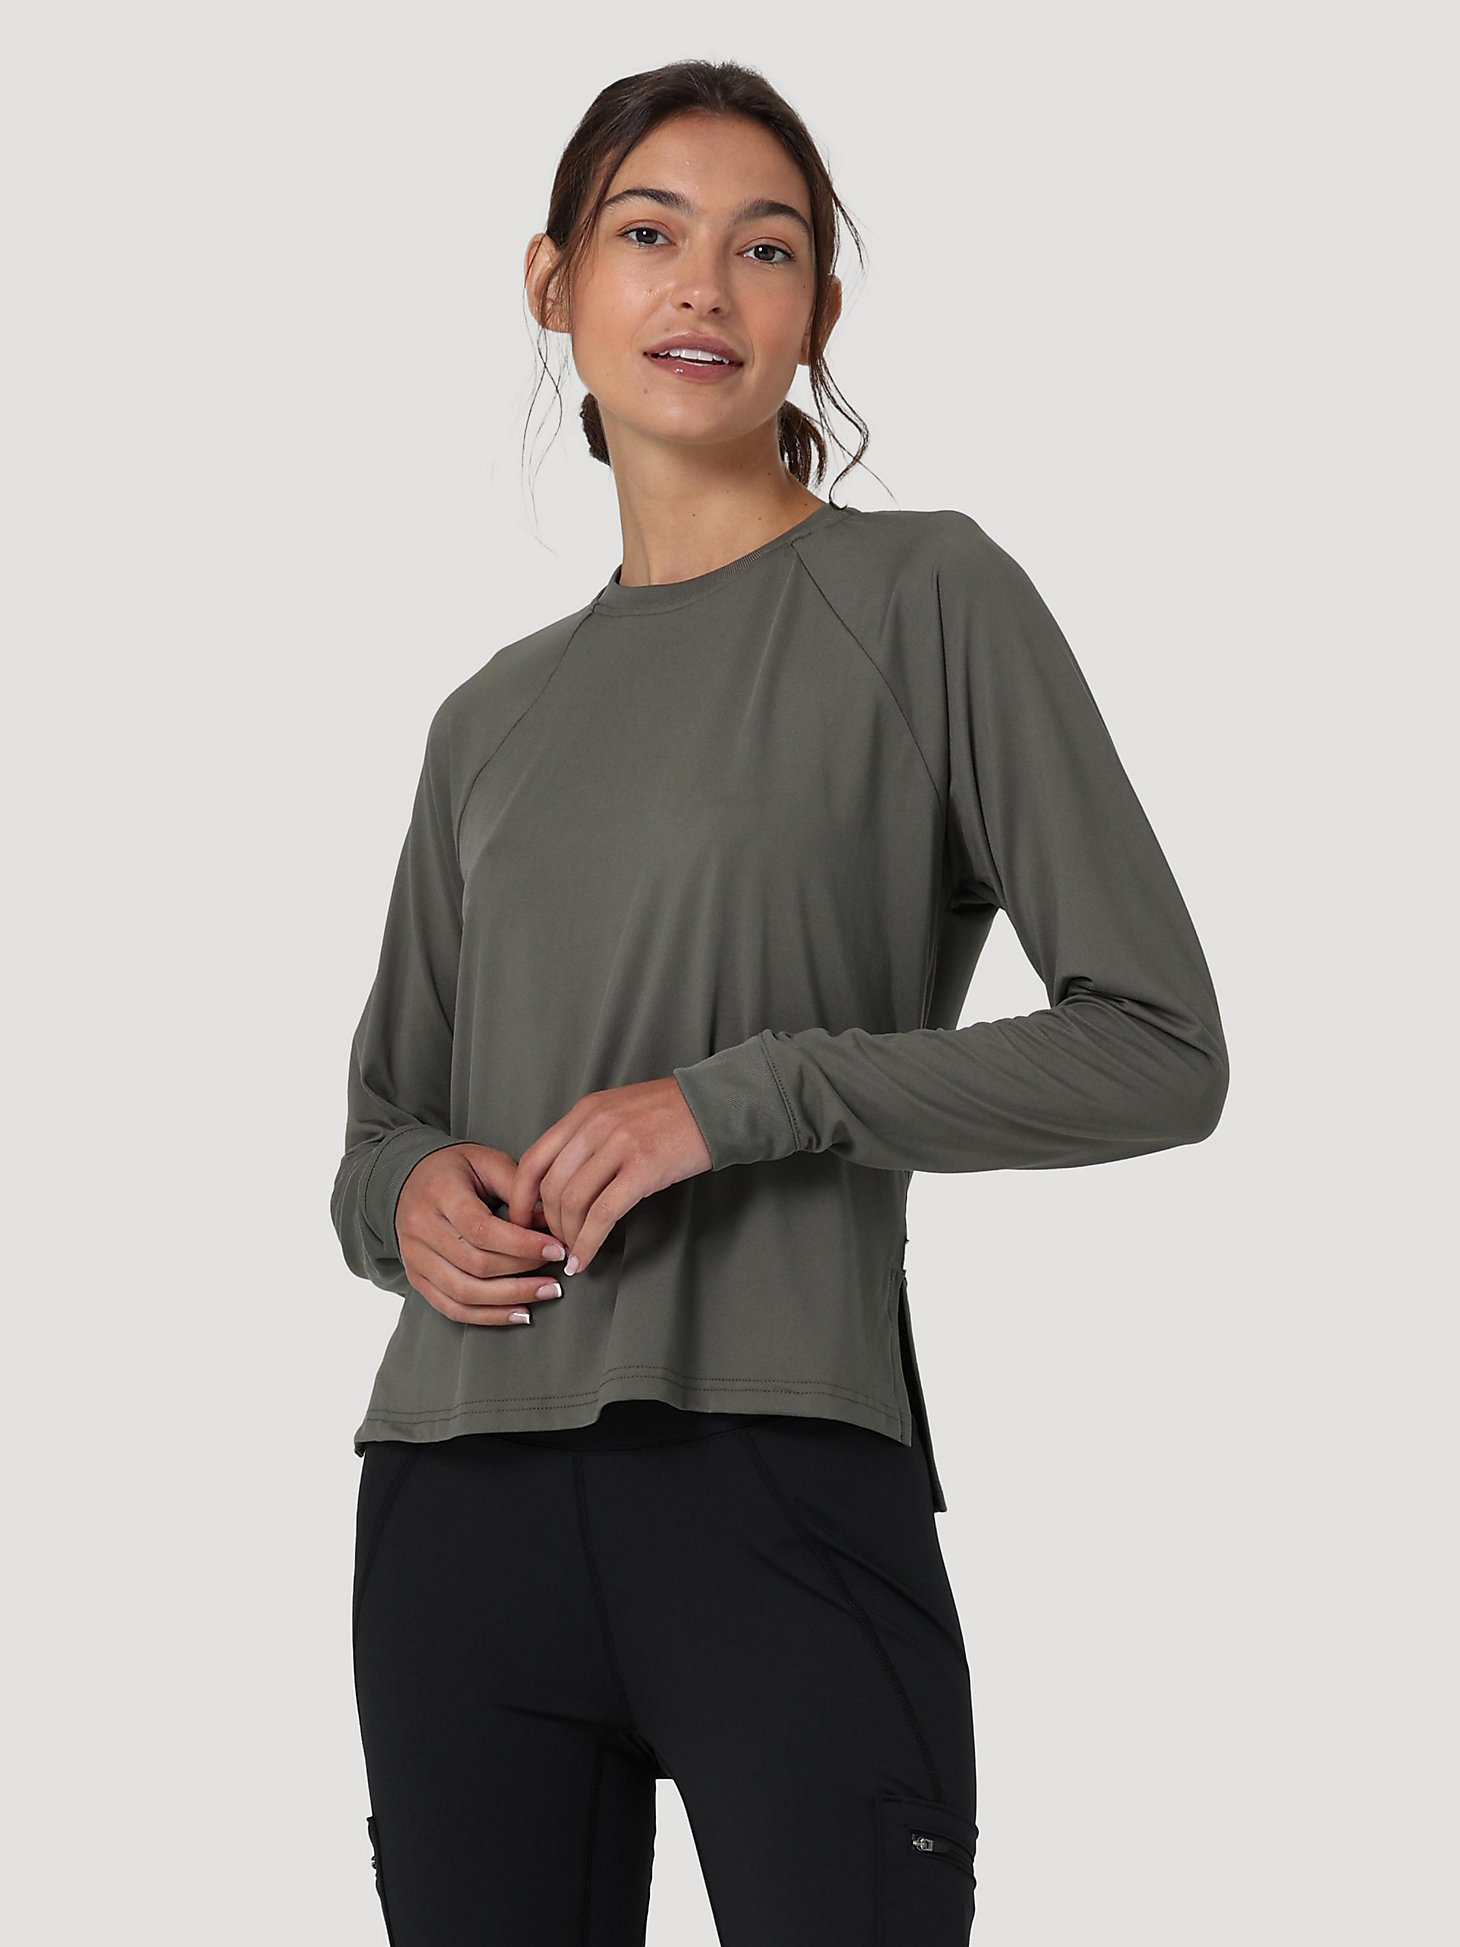 Long Sleeve Performance Tee in Dusty Olive main view